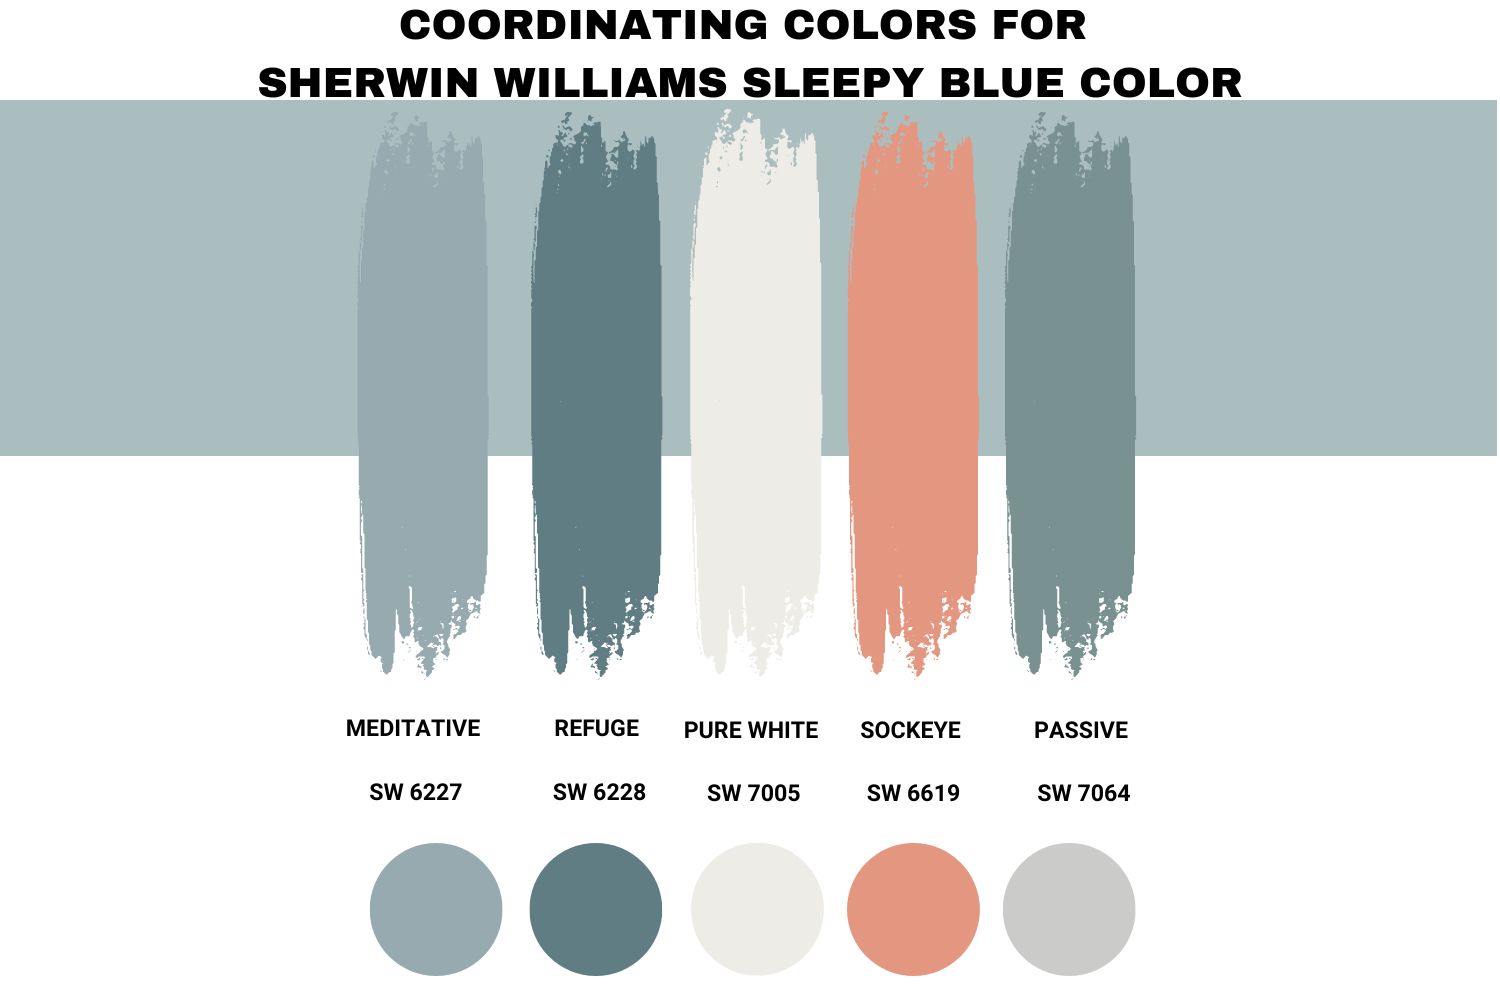 Coordinating Colors for Sherwin Williams Sleepy Blue Color